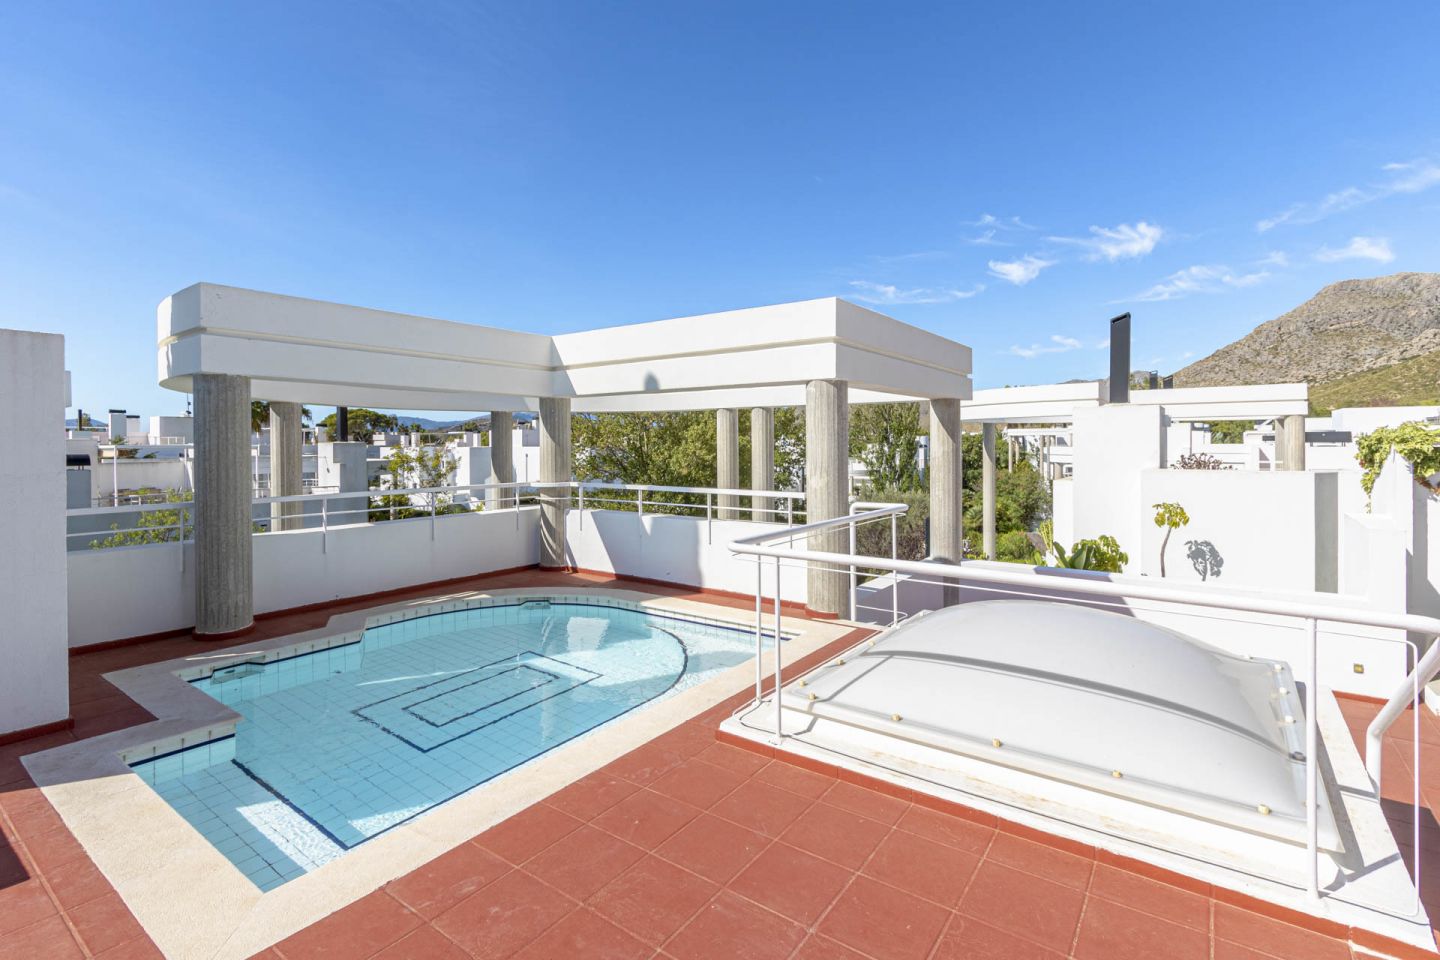 Townhouse of 246m2 on sale in Puerto Pollensa